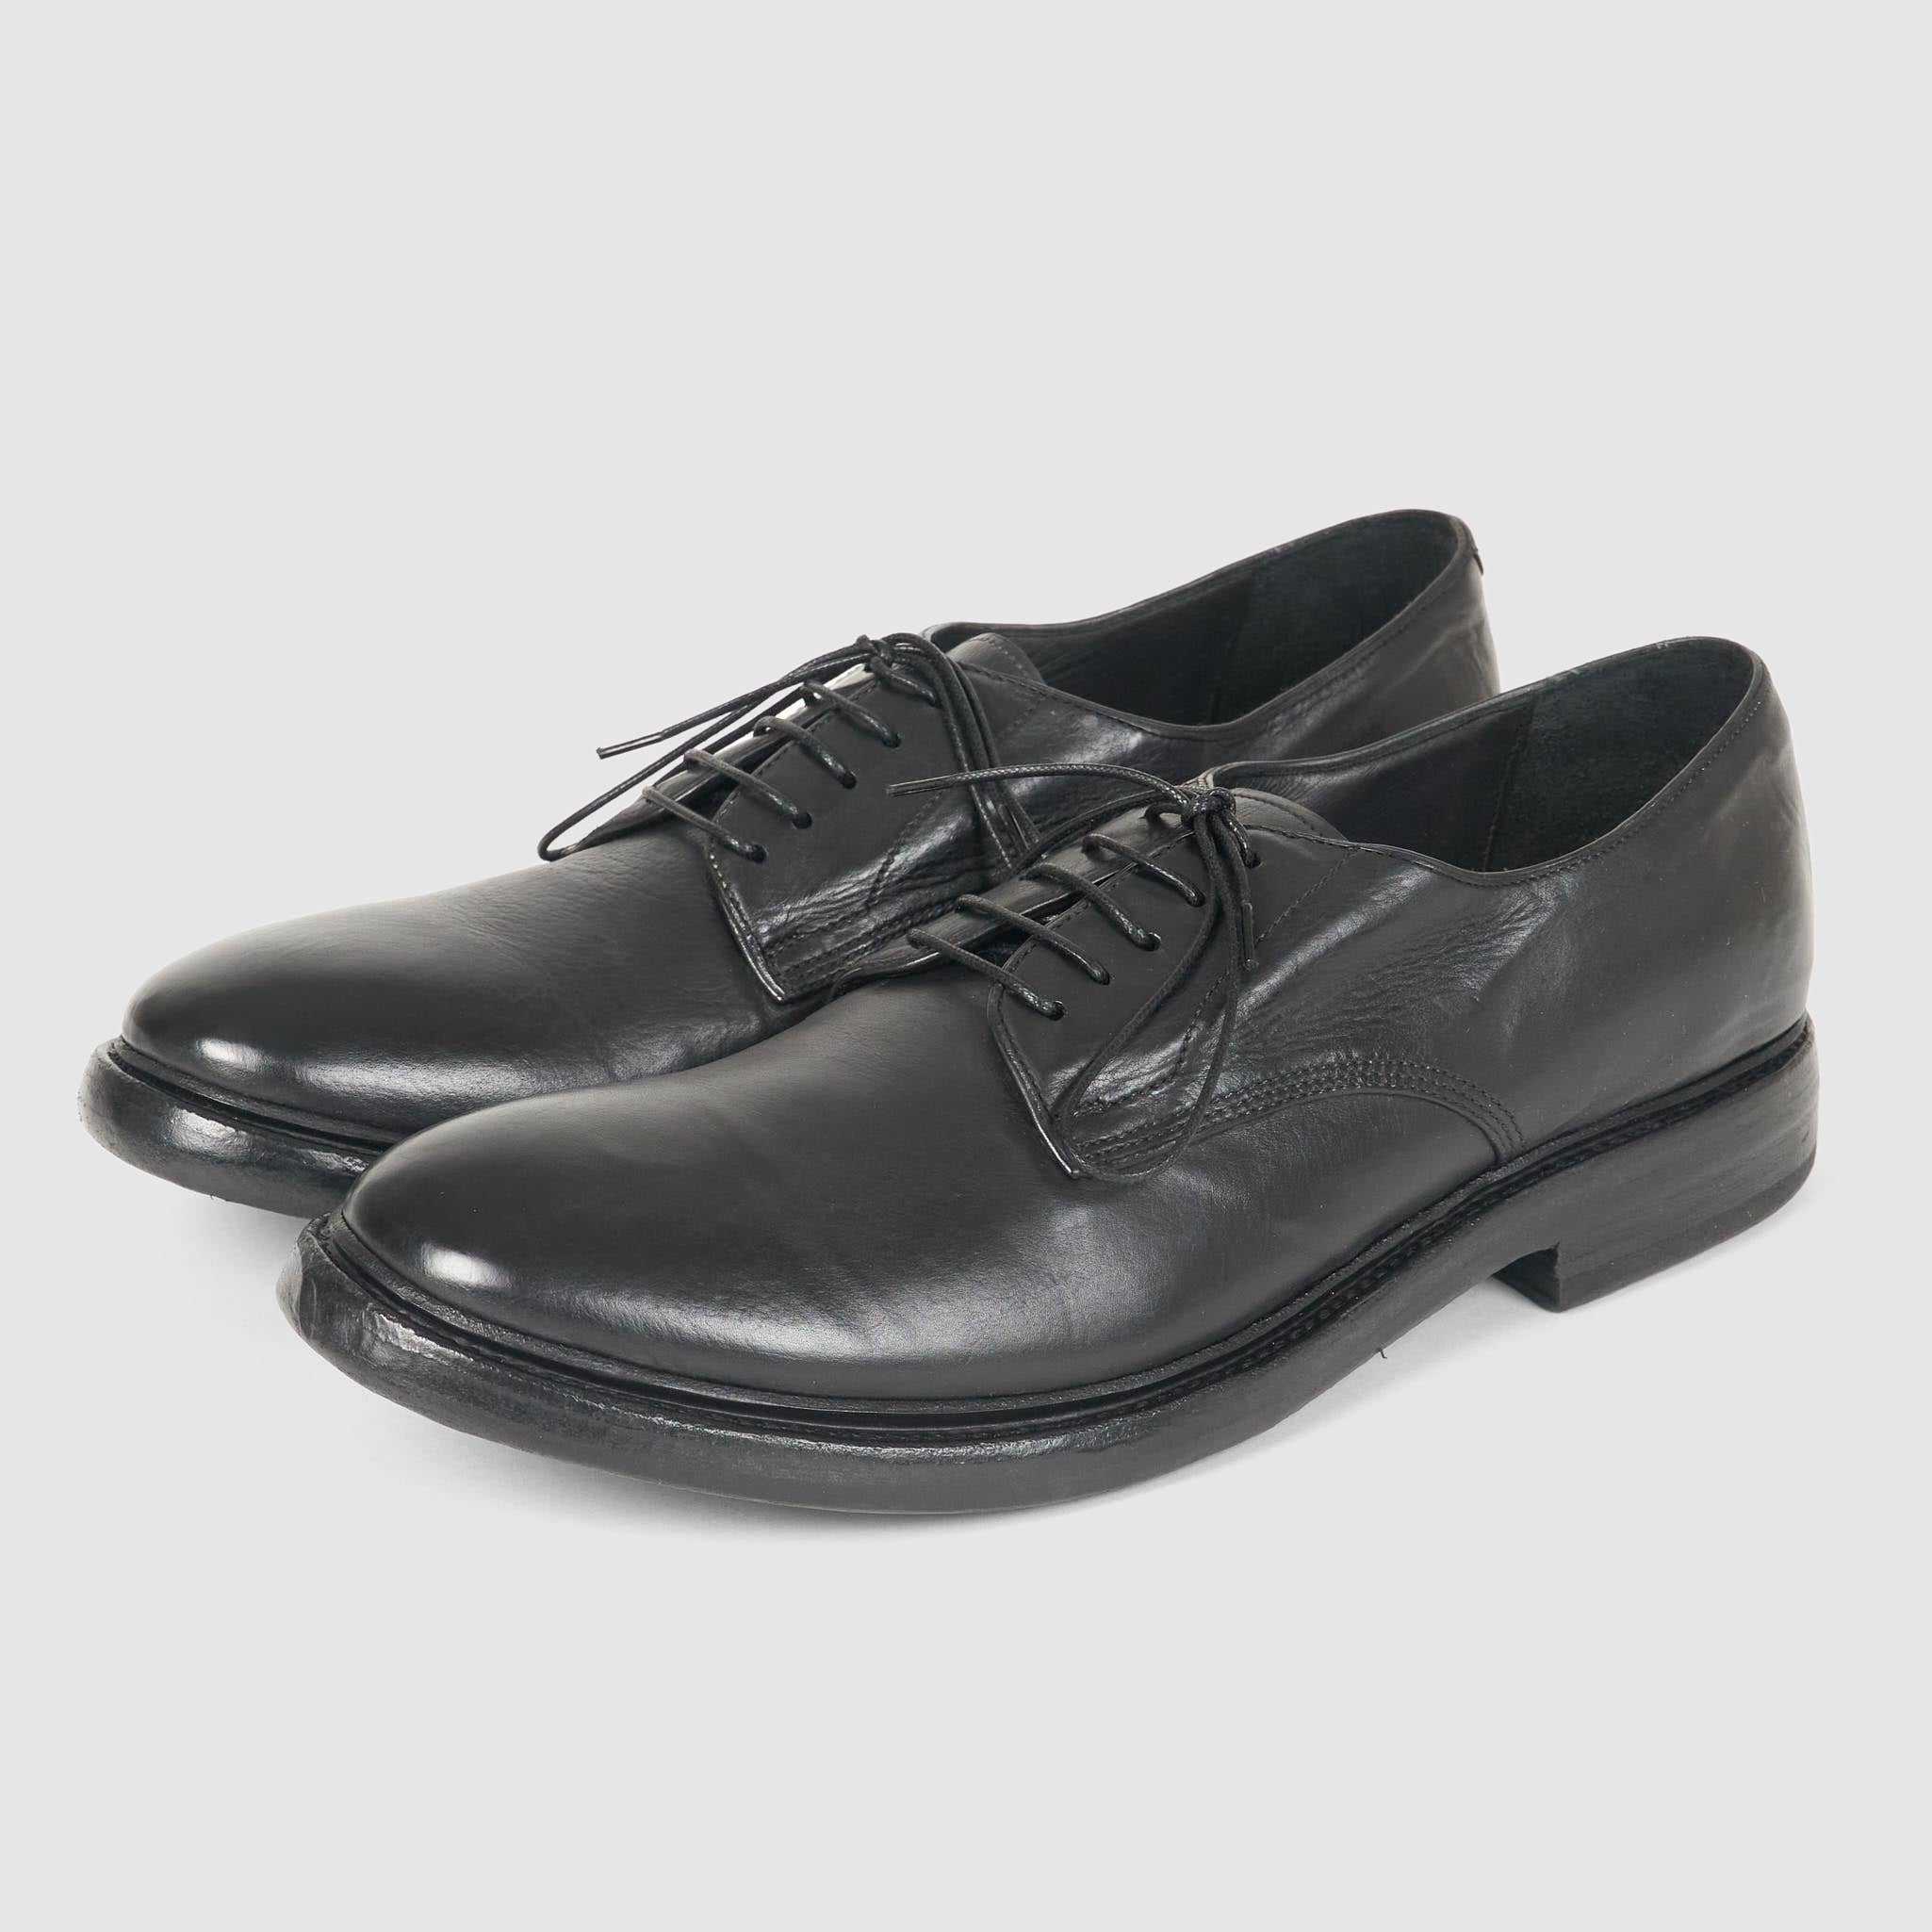 Preventi Classic Hand Made Service Shoe - DeeCee style